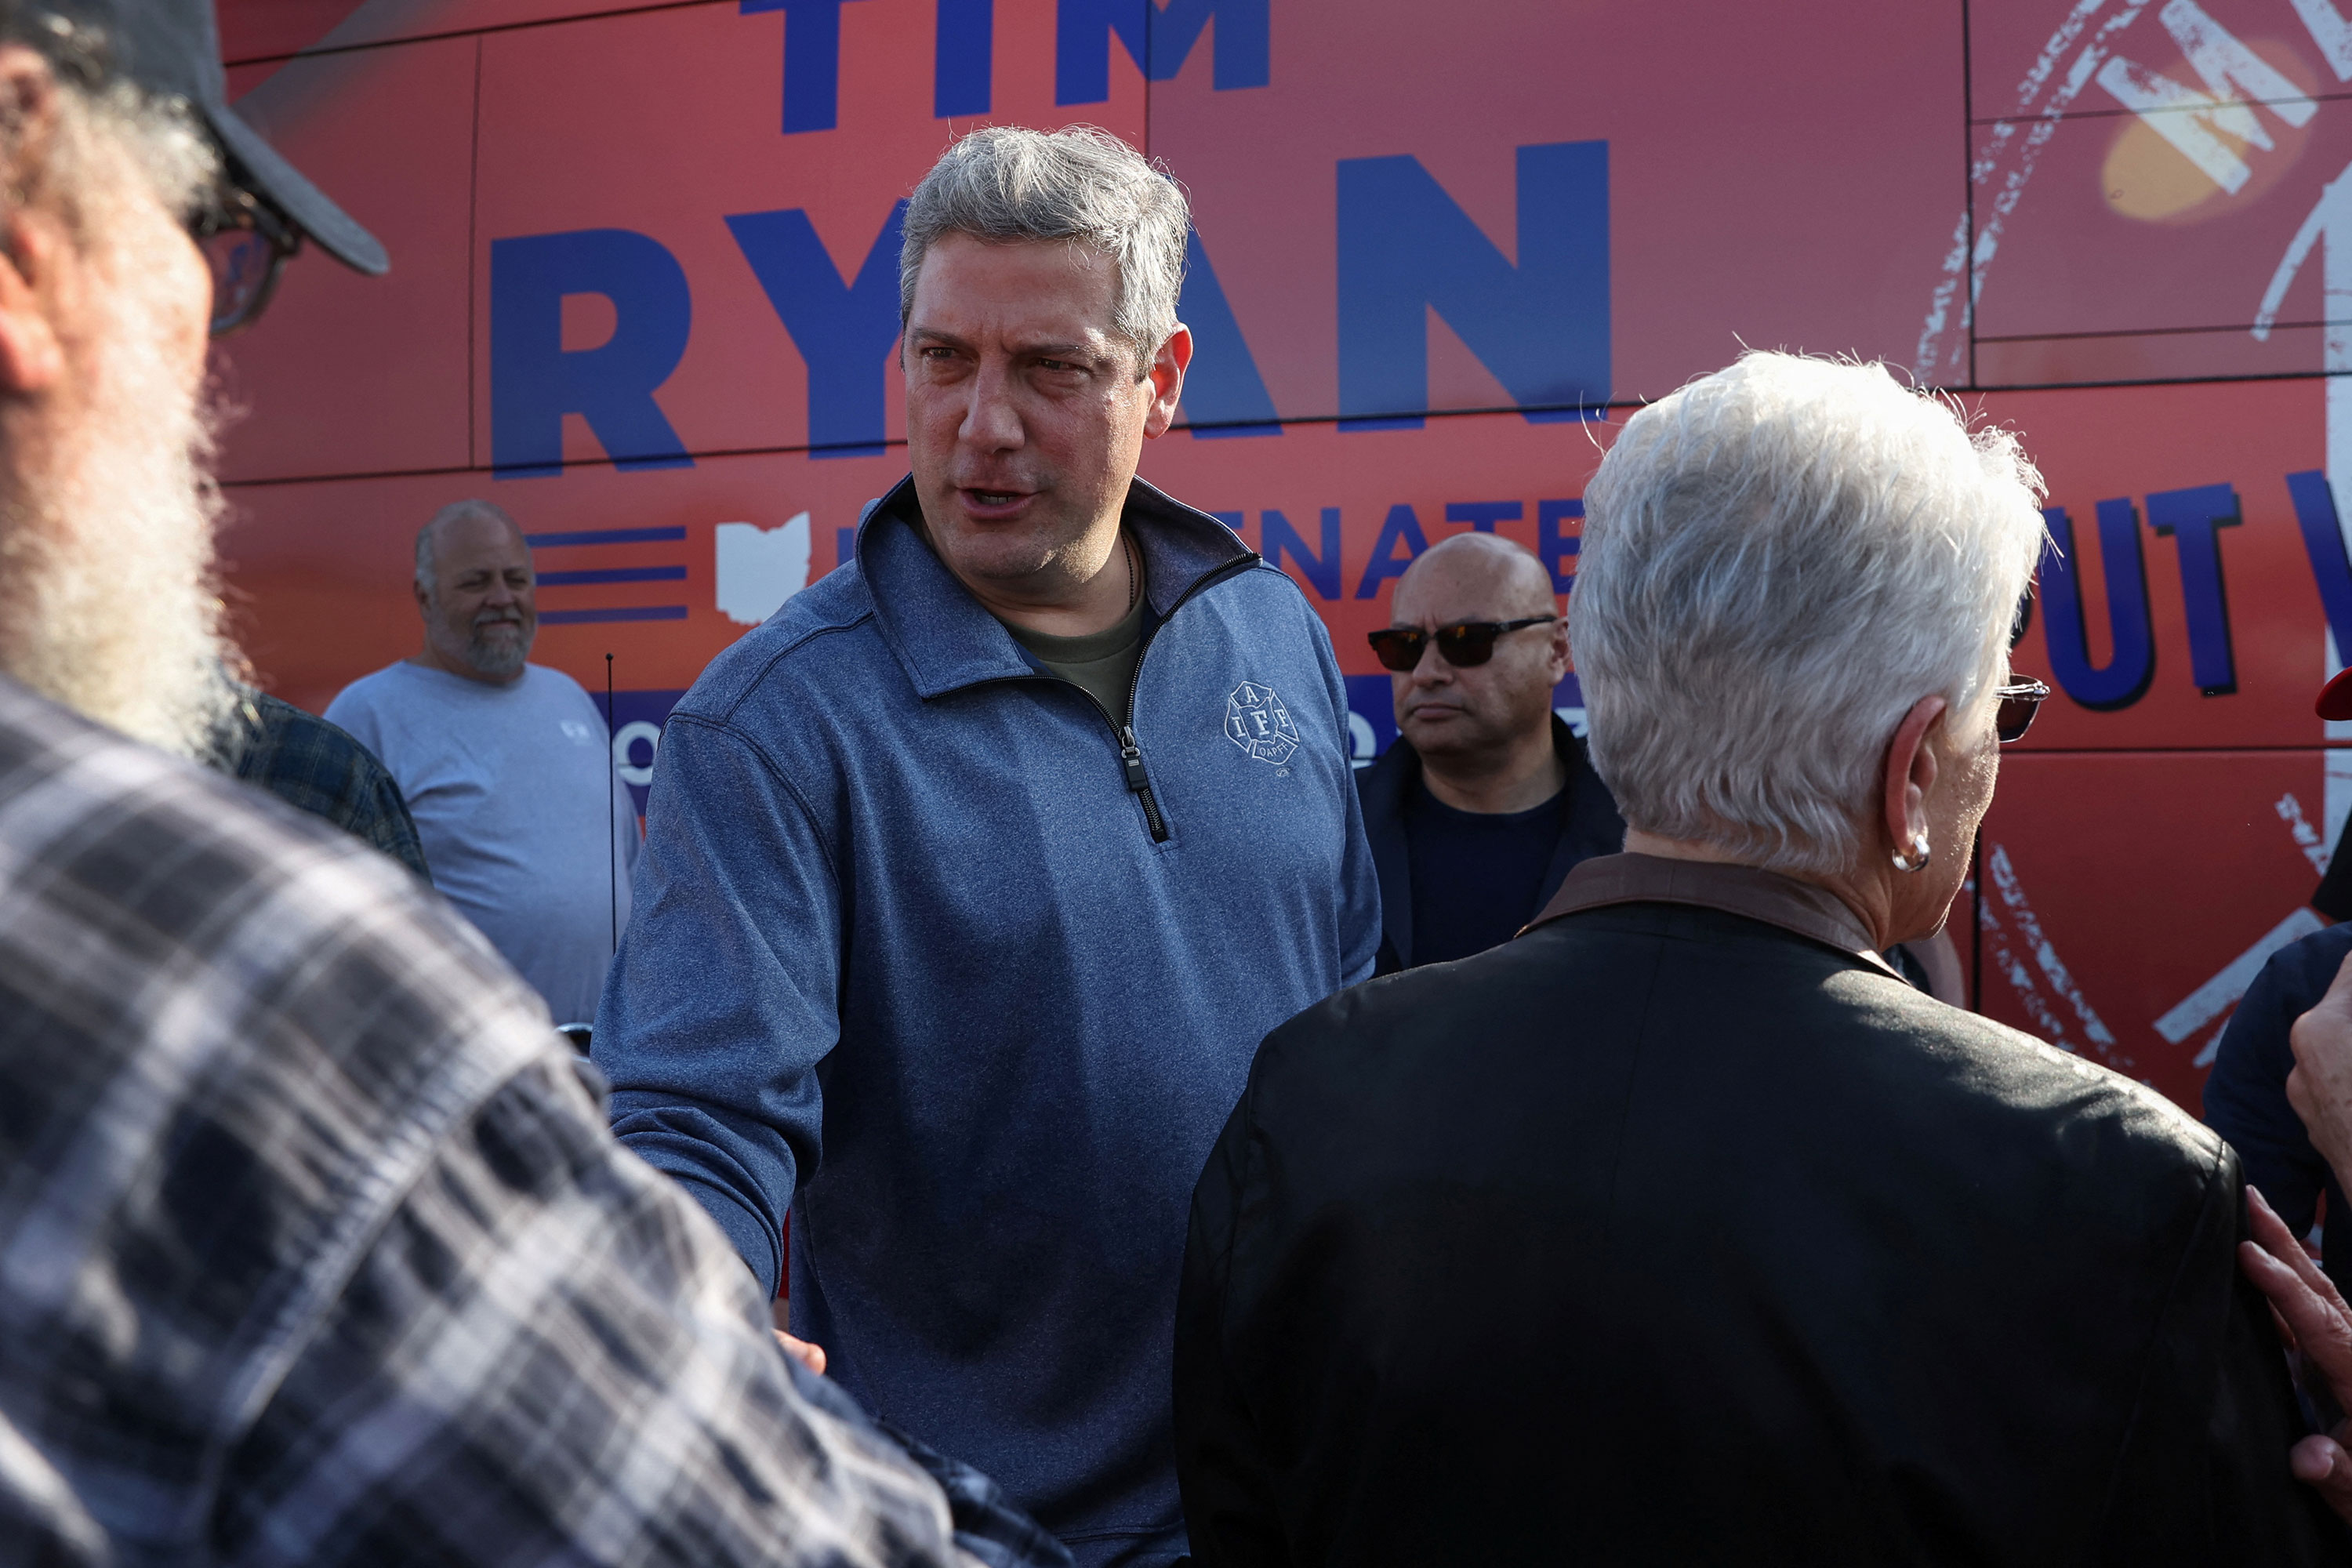 Rep. Tim Ryan shakes hands with supporters during a campaign stop in Toledo, Ohio, on Wednesday.